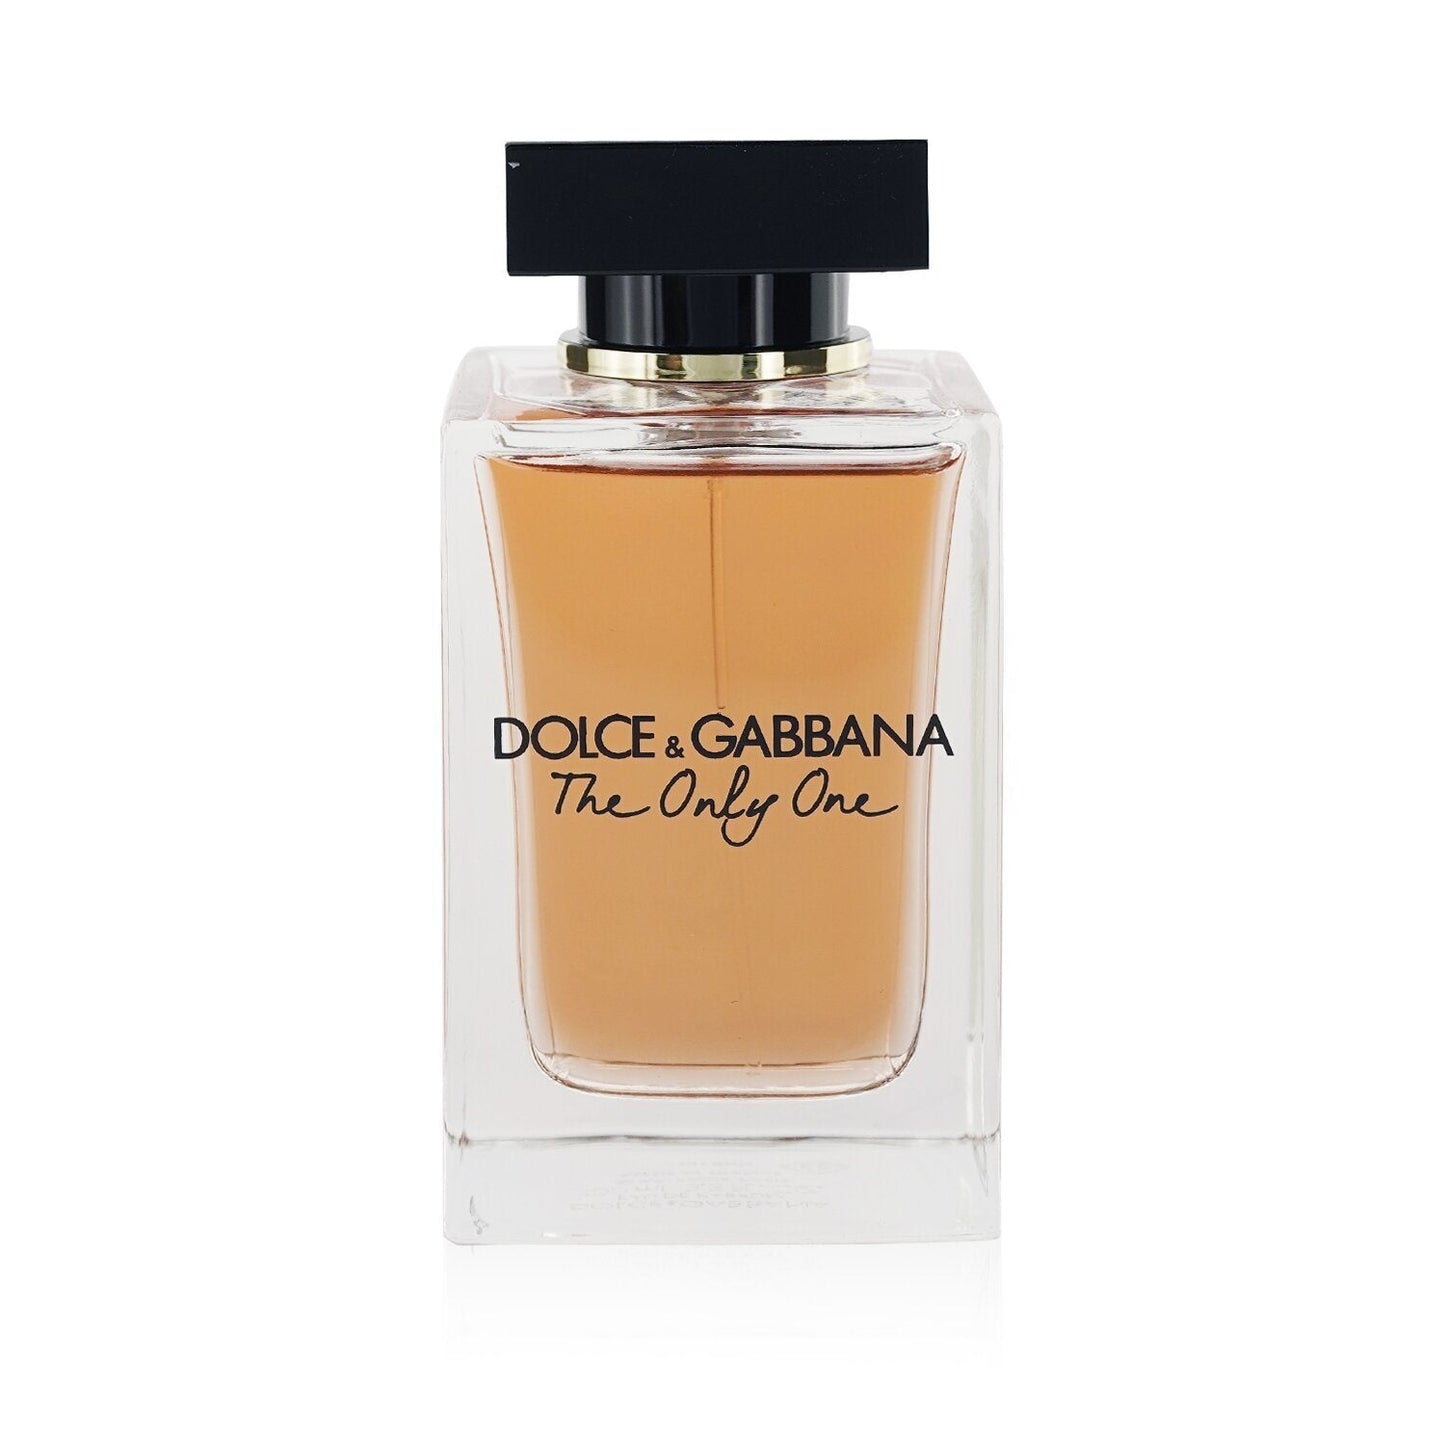 Dolce & Gabbana The only one EDP